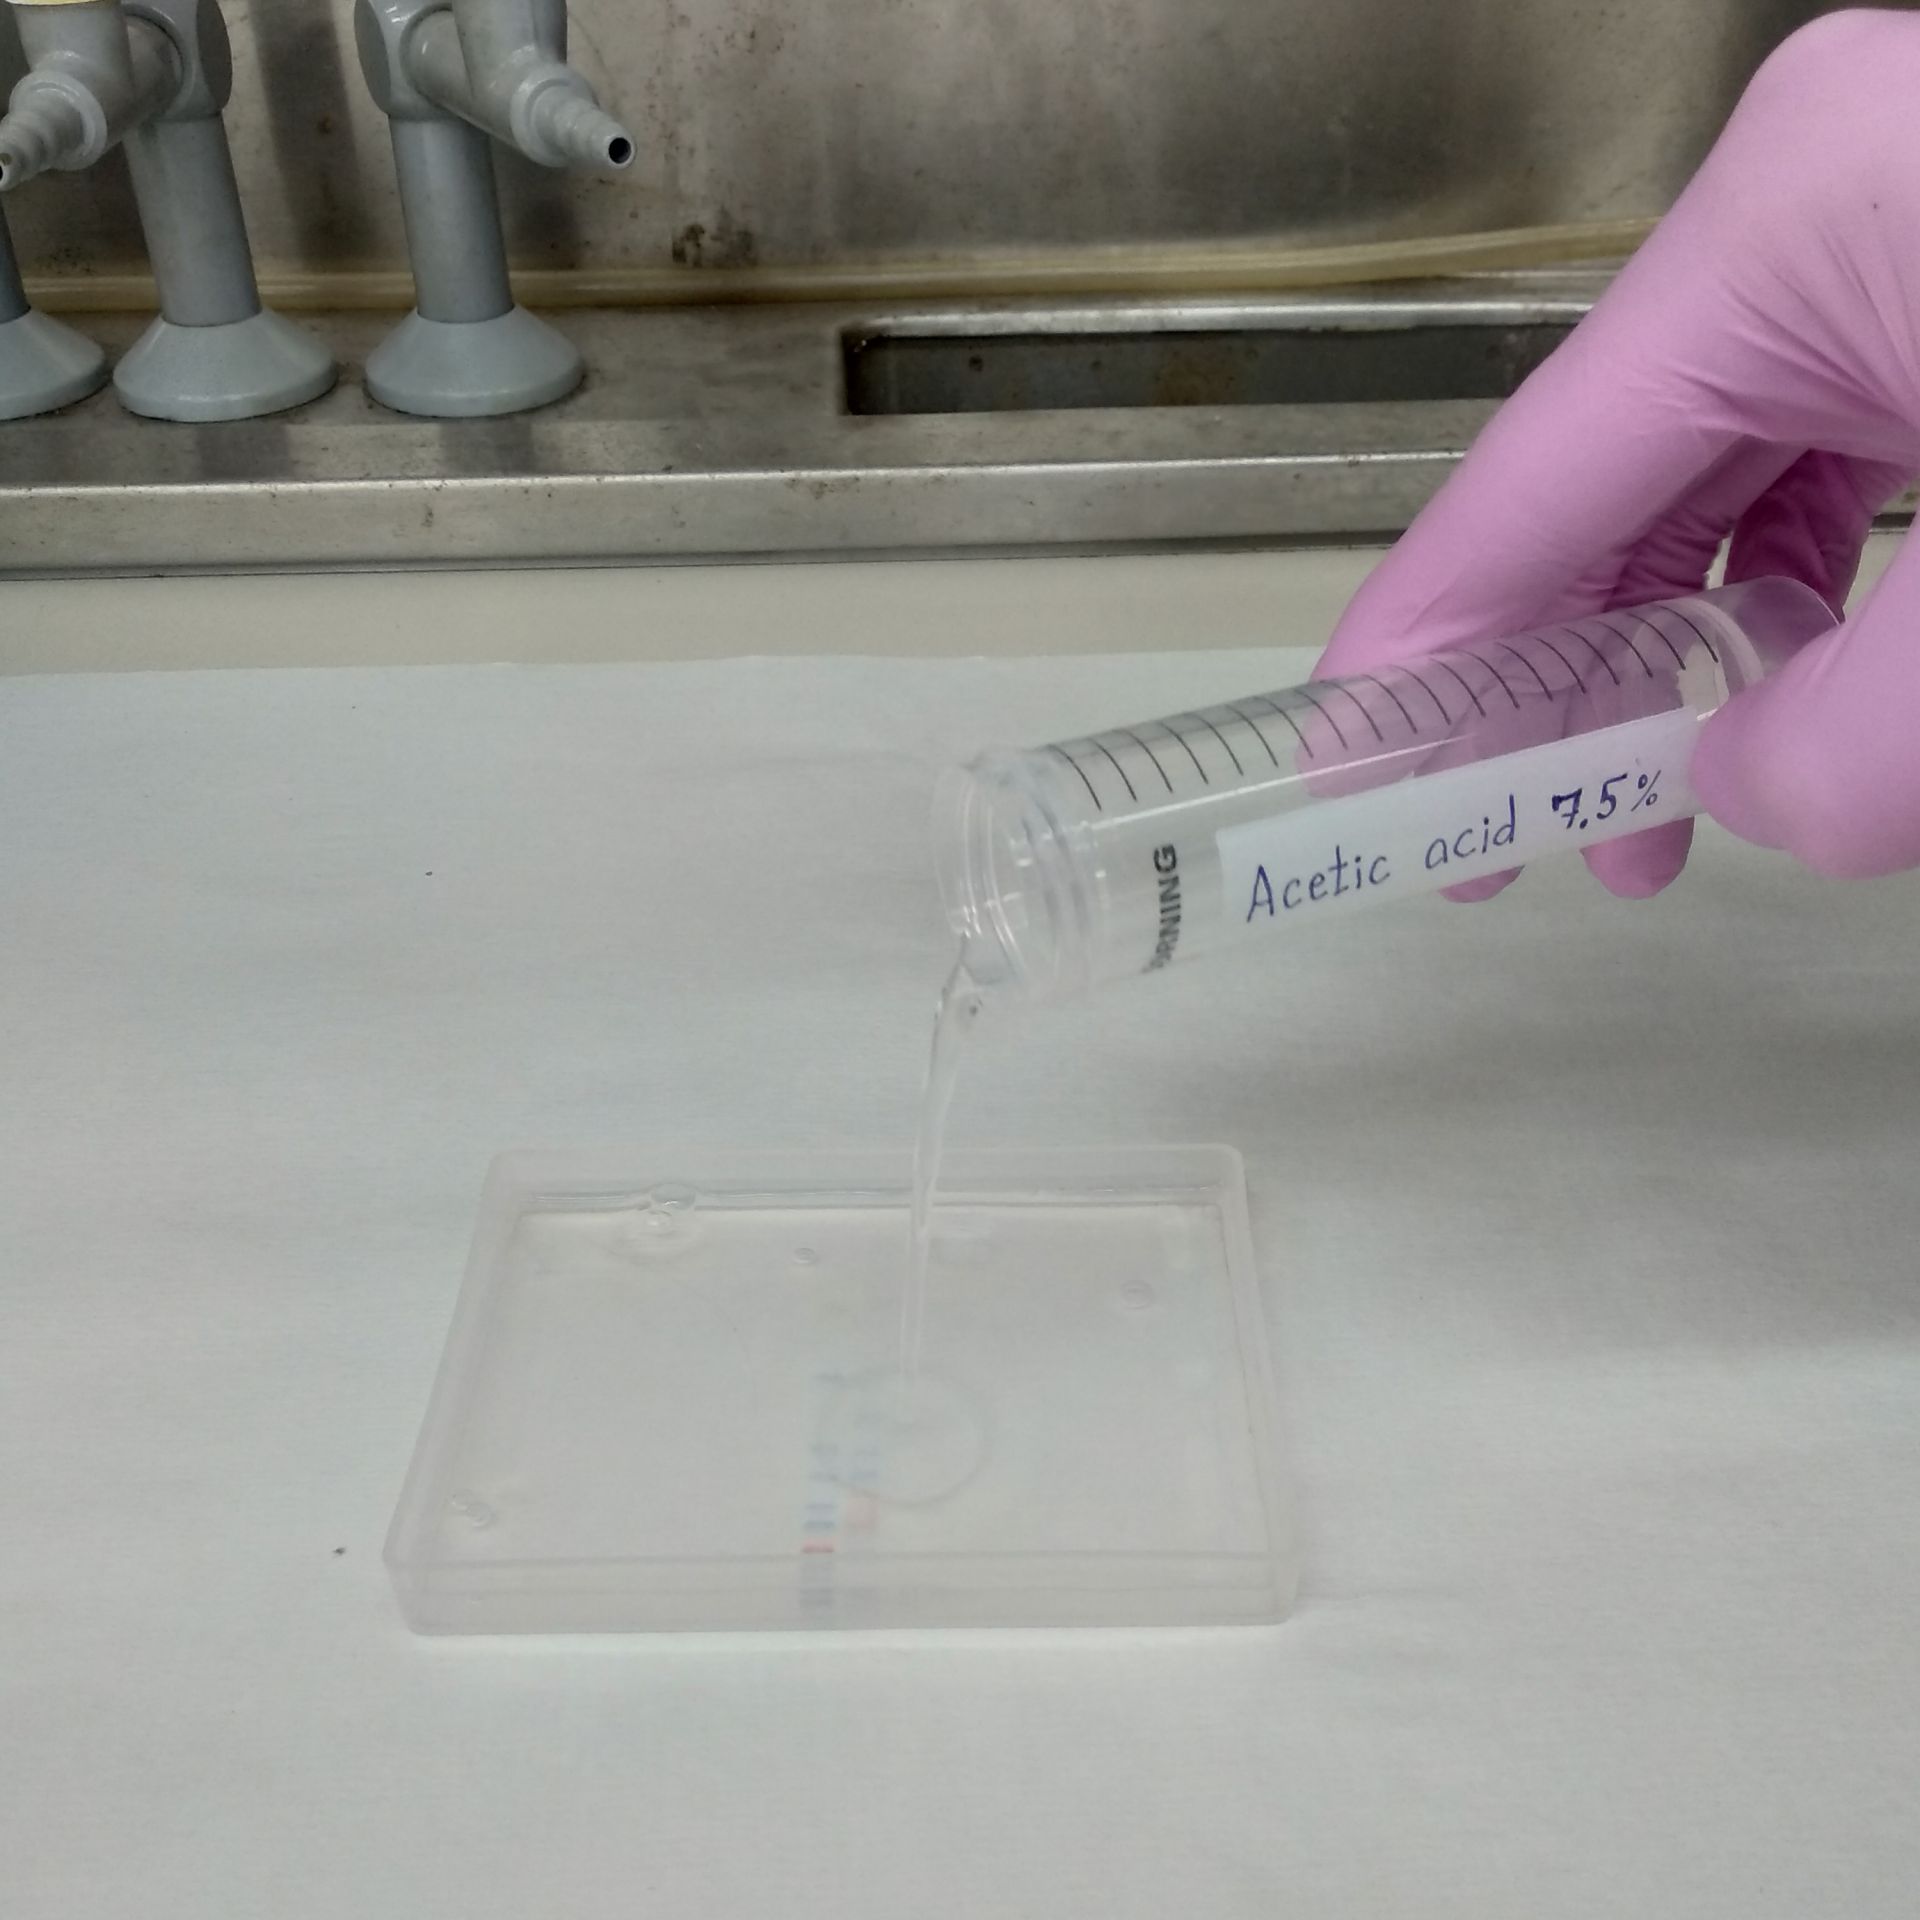 Rinse the gel in a 7.5% acetic acid solution